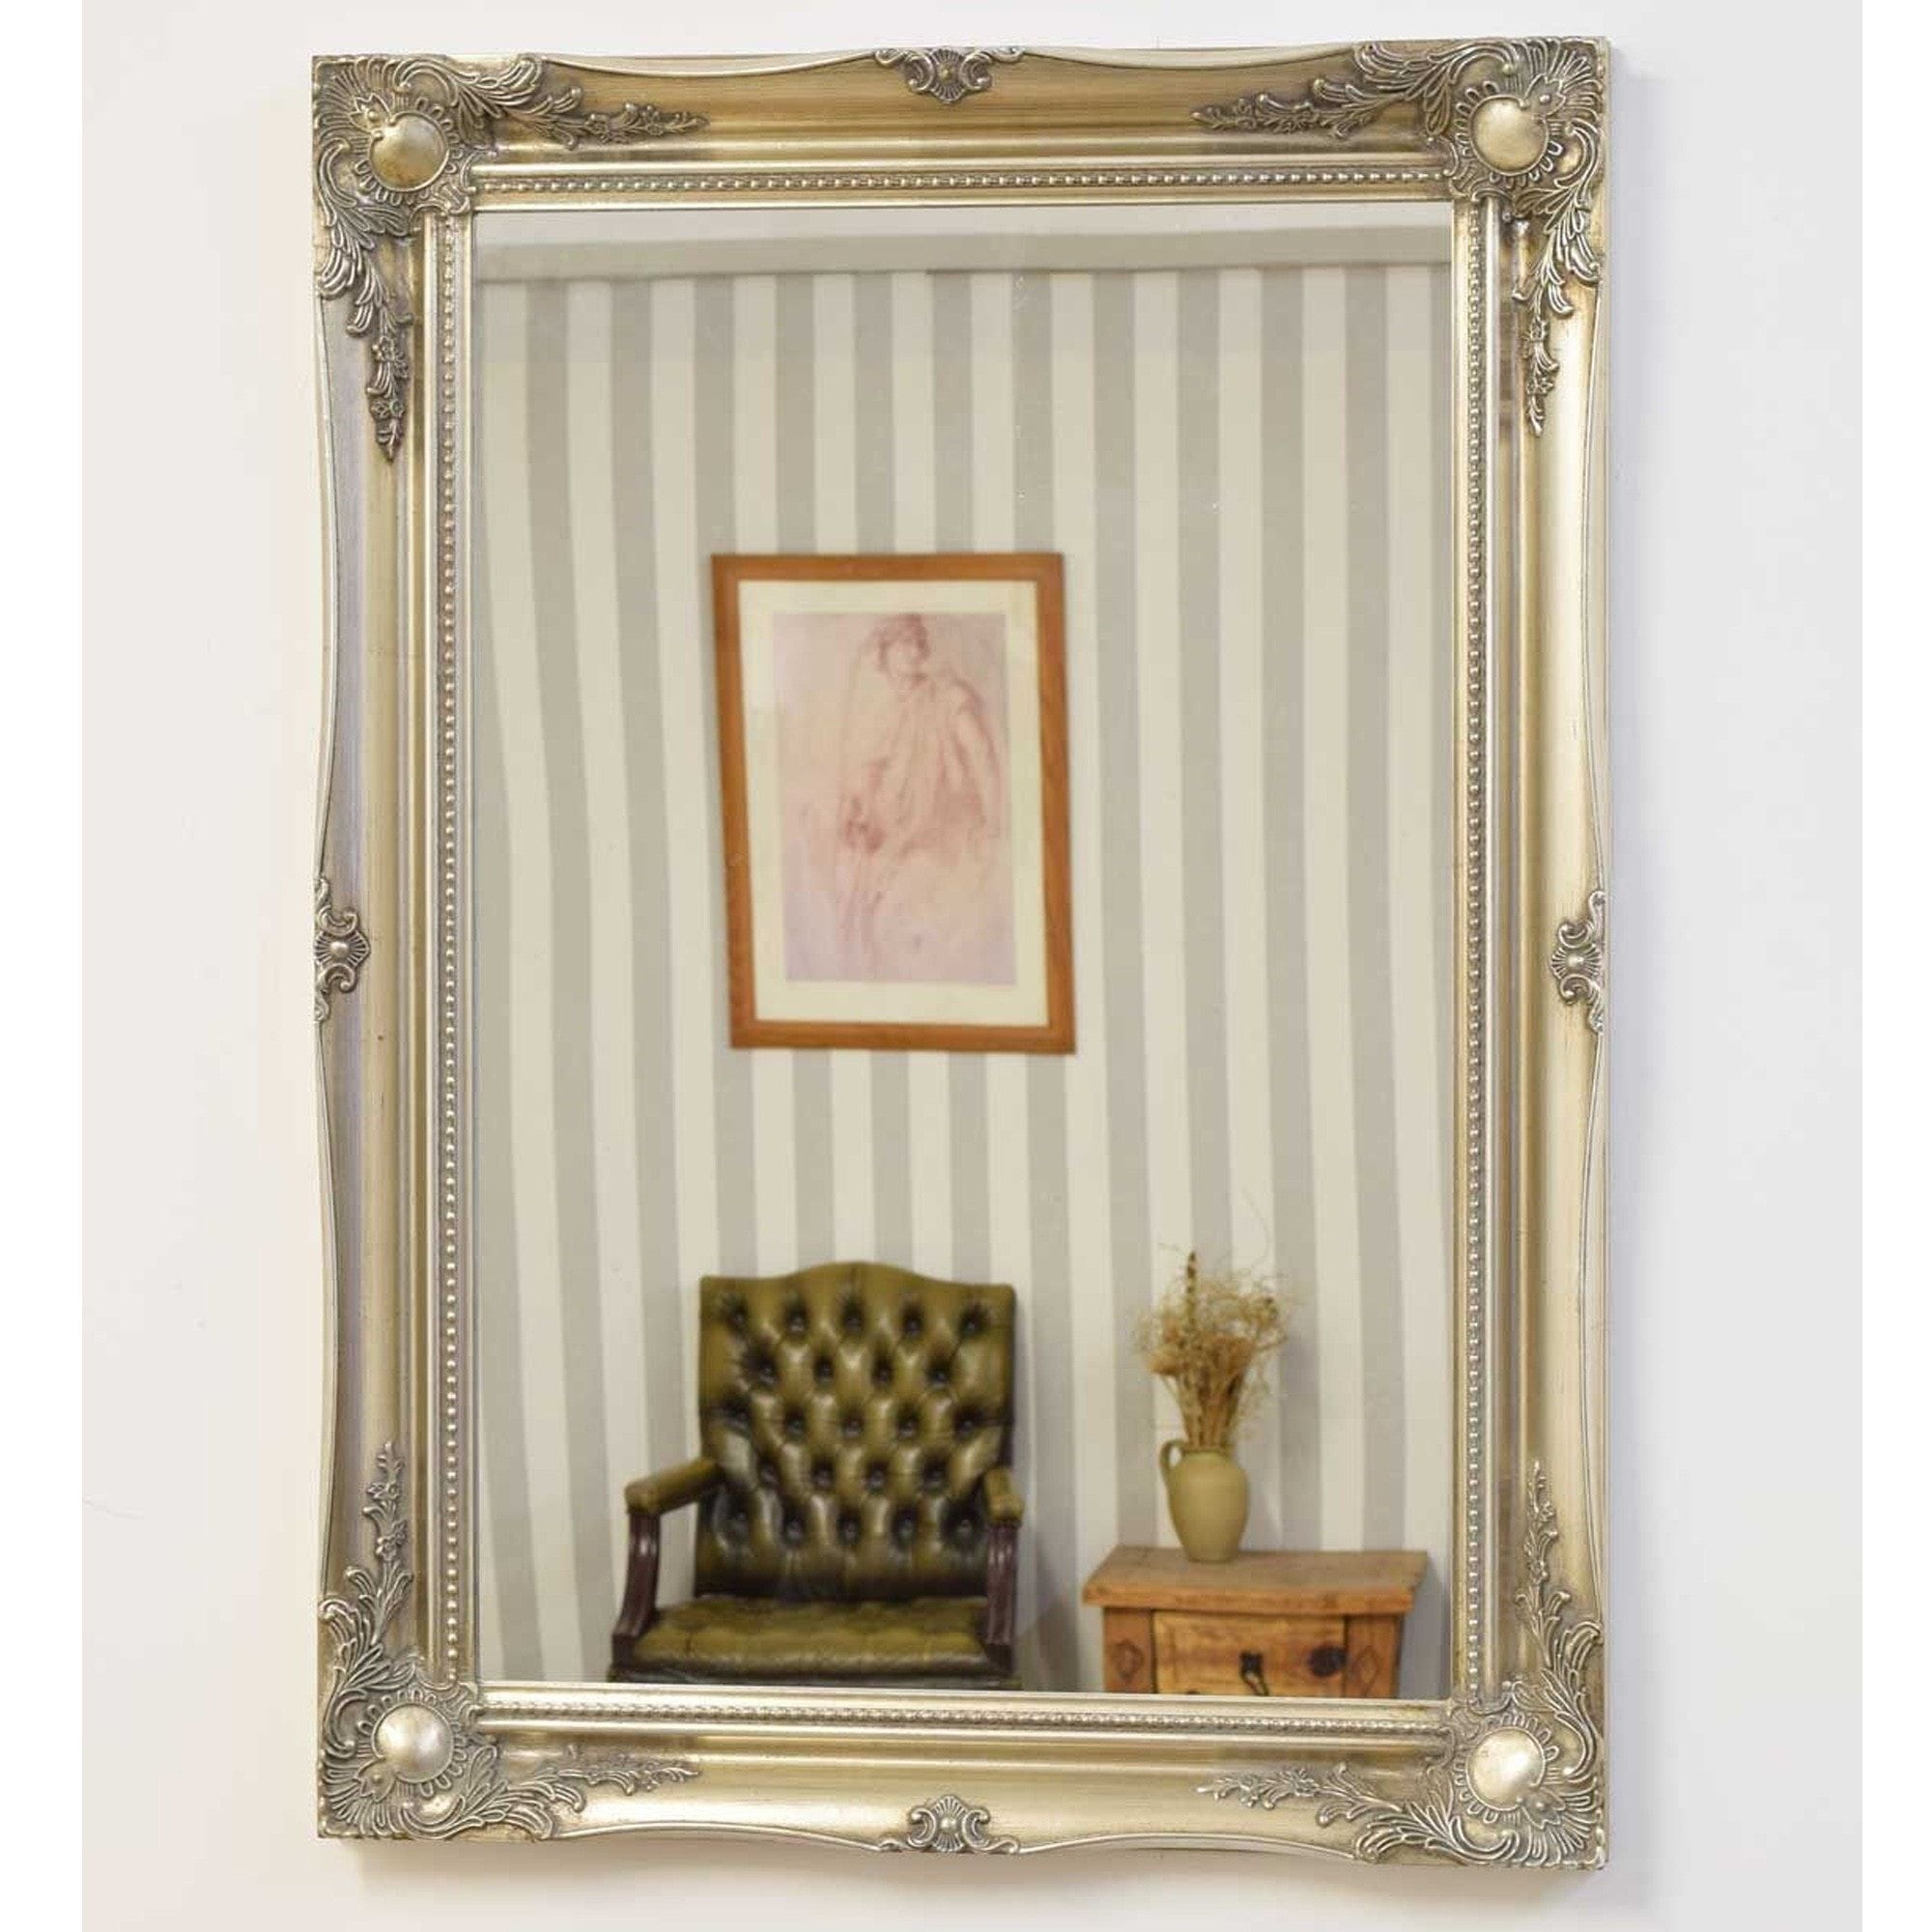 Antique French Wall Mirror | Silver Decorative Mirrors Pertaining To Booth Reclaimed Wall Mirrors Accent (View 5 of 15)